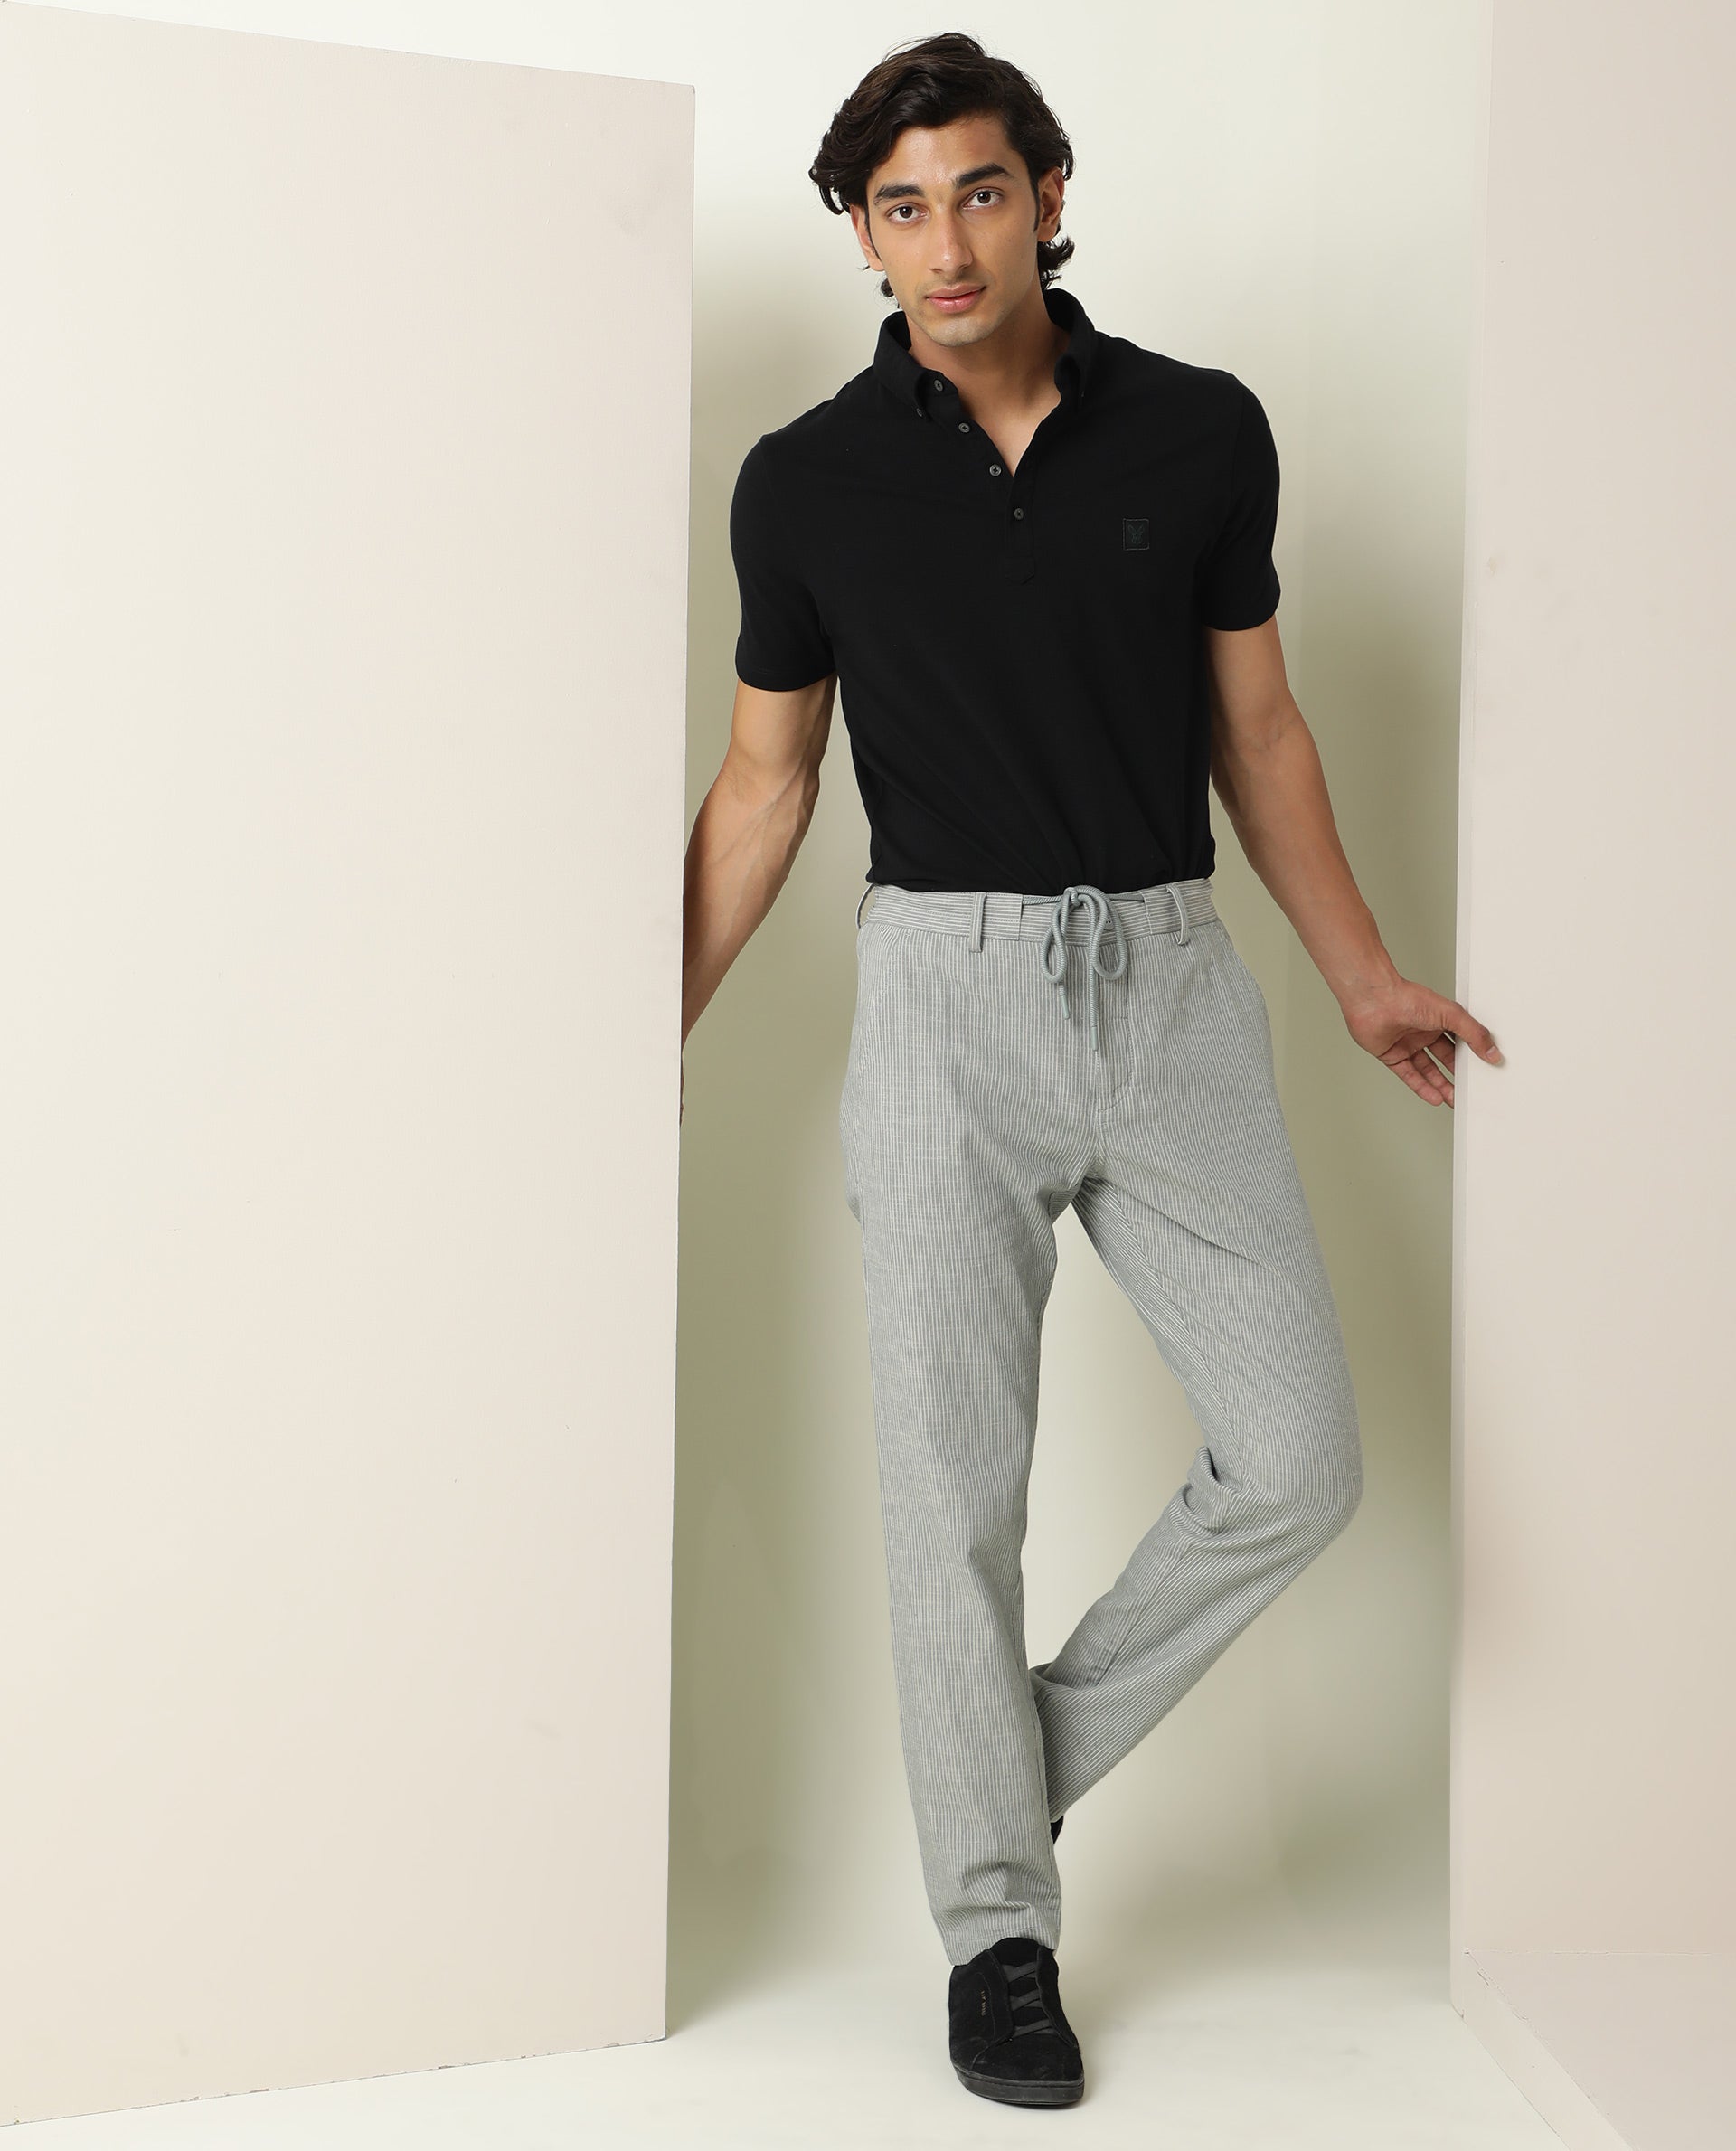 17 Tshirt and formal pants outfits ideas  mens fashion casual stylish men  mens casual outfits